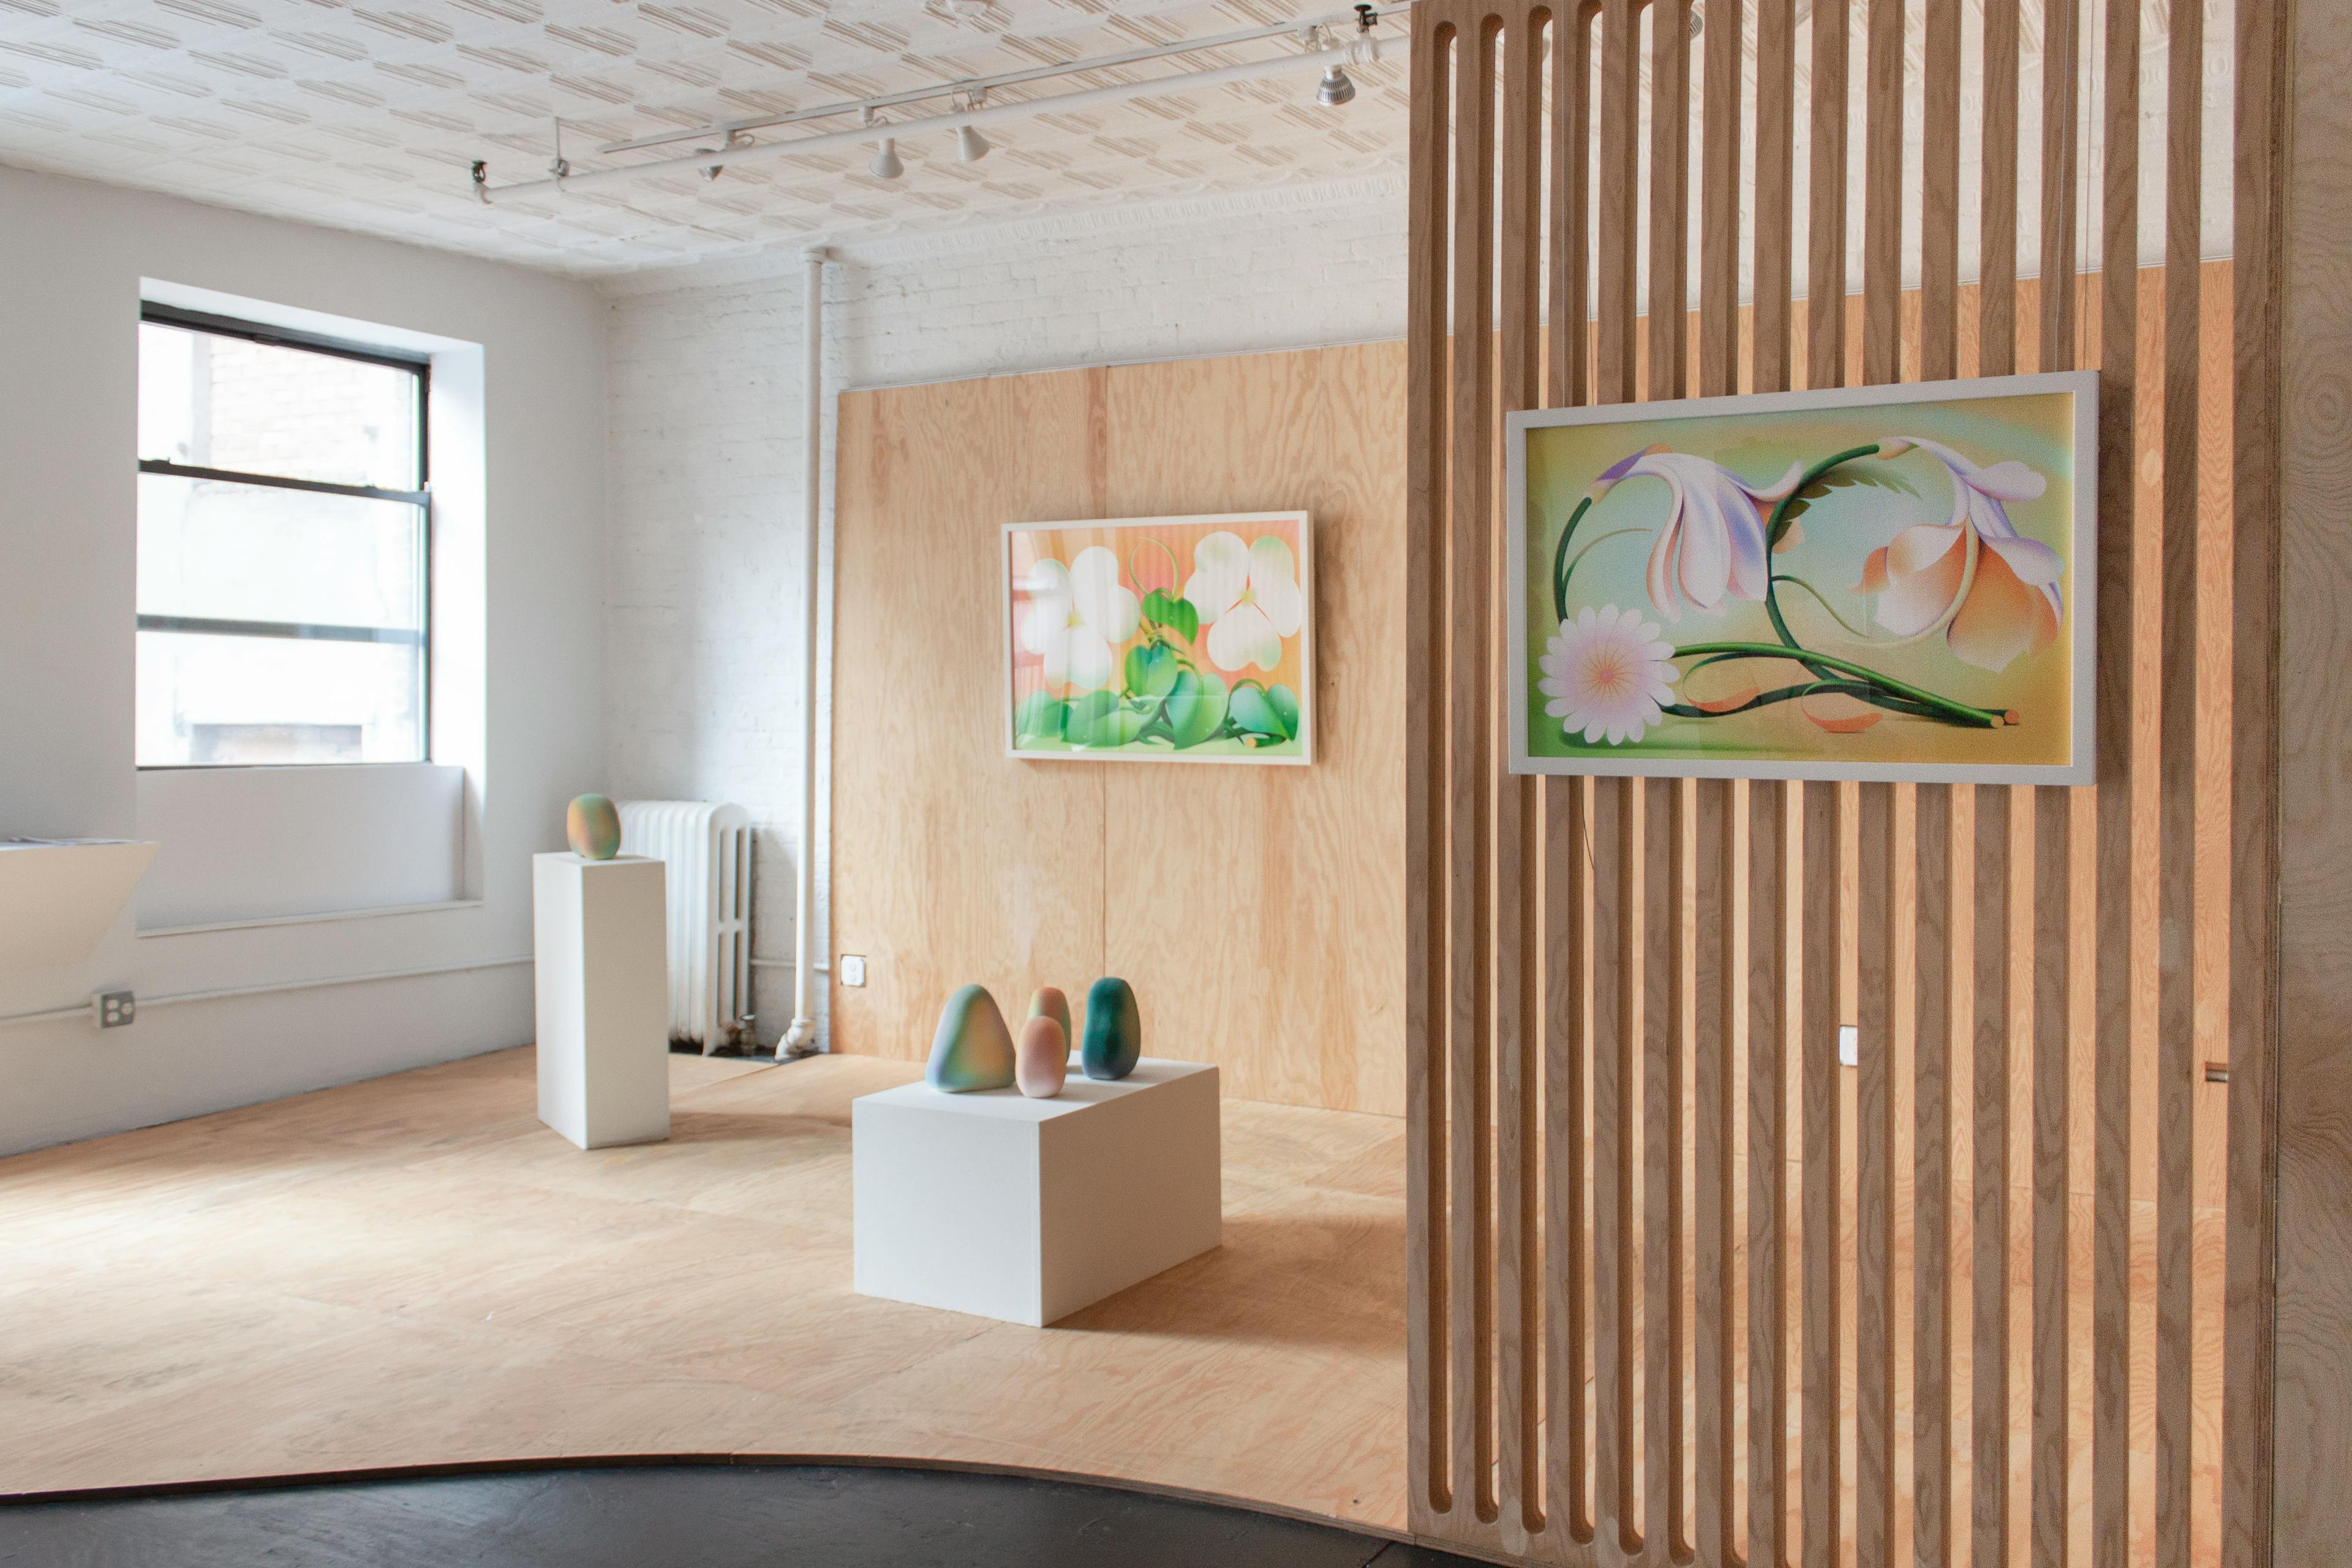 Artwork installed as part of Tending Mass, one of Uprise Art's Exhibitions in New York, NY.